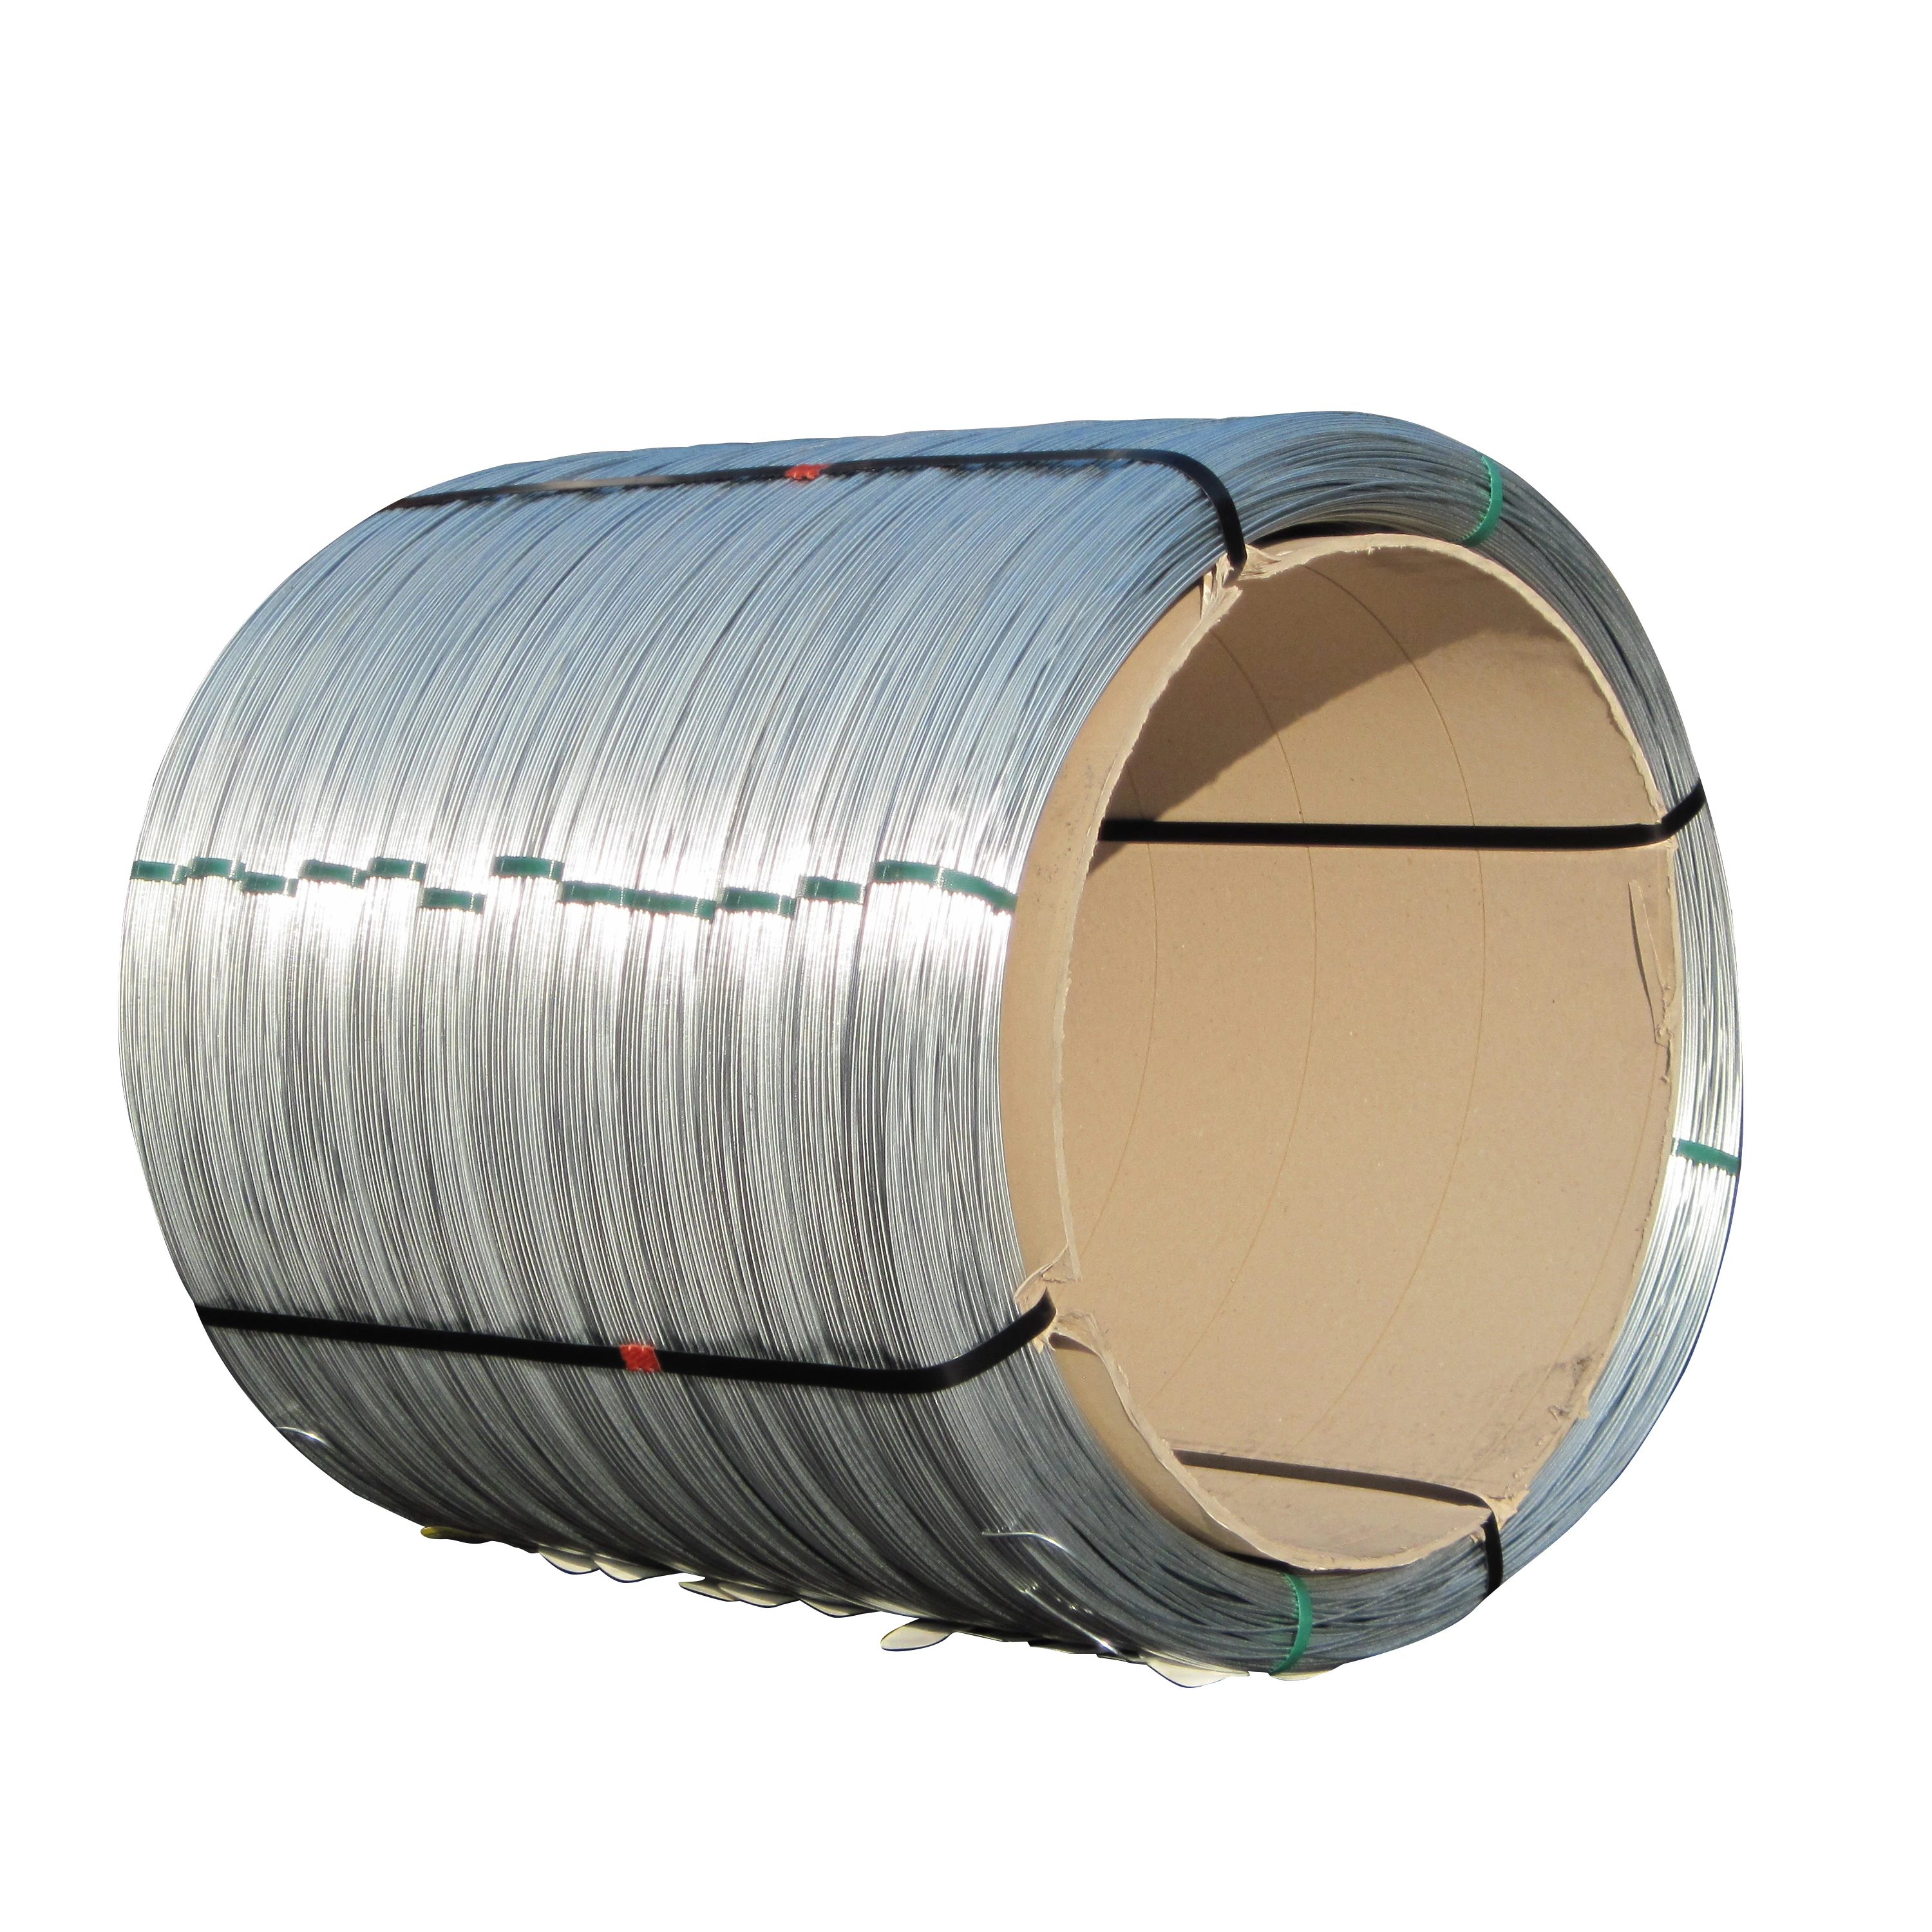 Top quality Italian zinc-alu steel wire for orchards diam. 1.80 mm